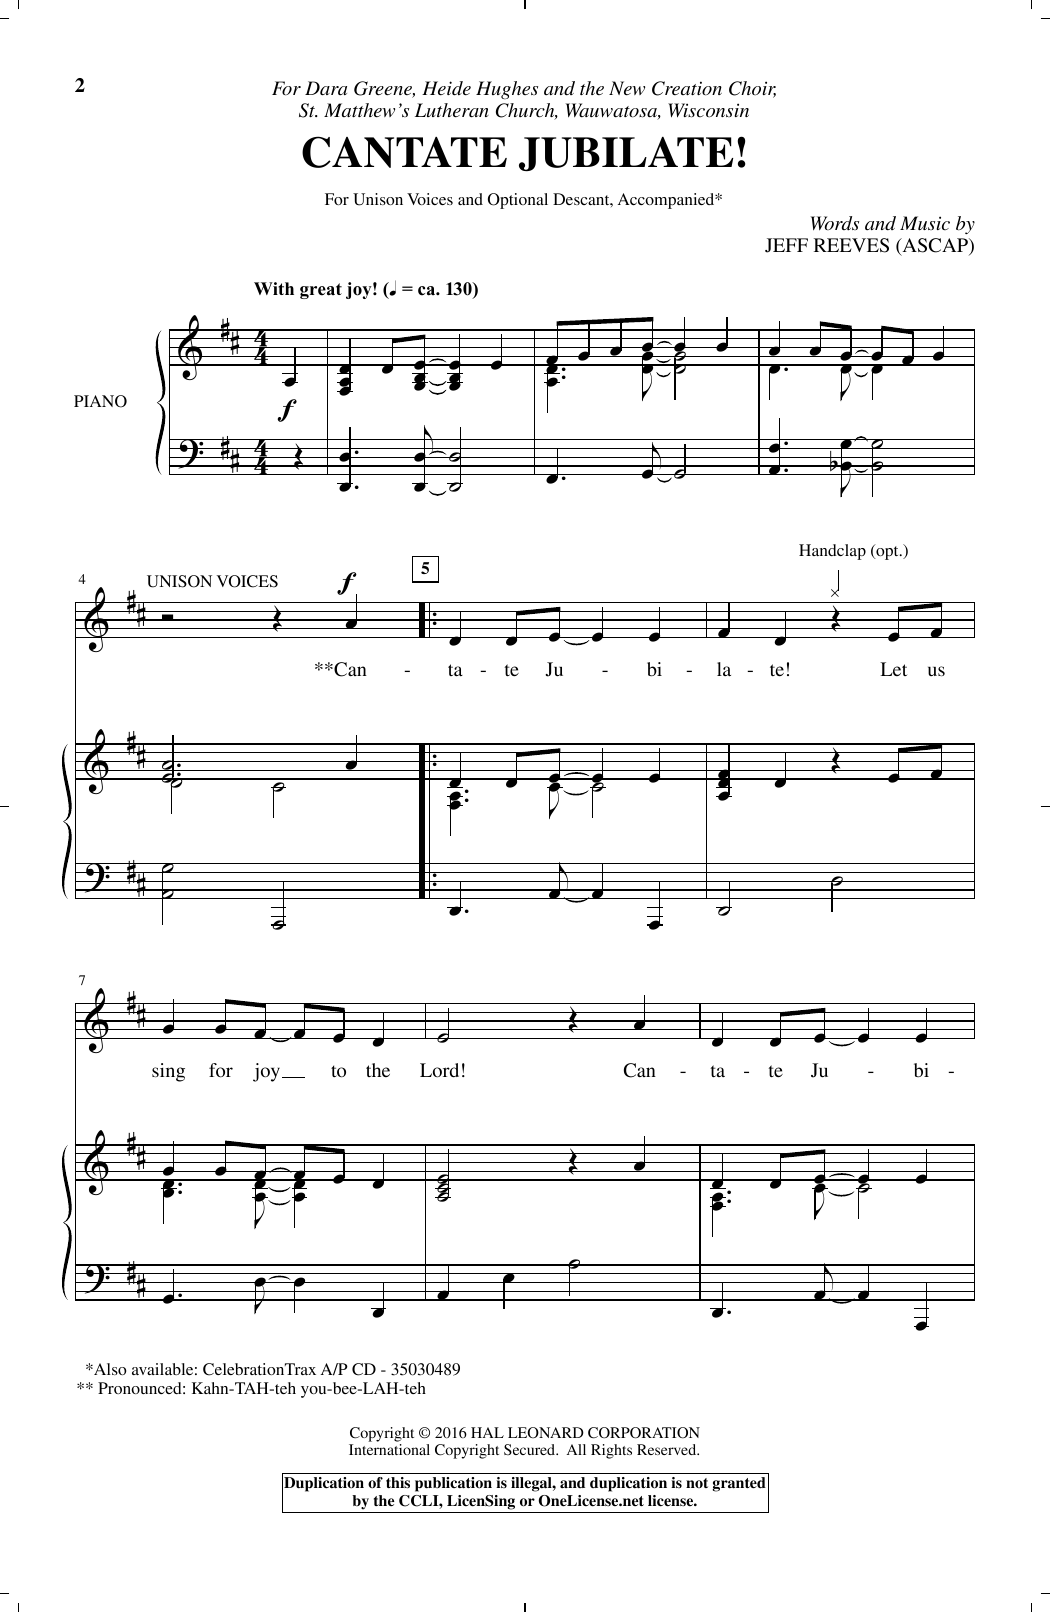 Download Jeff Reeves Cantate Jubilate! Sheet Music